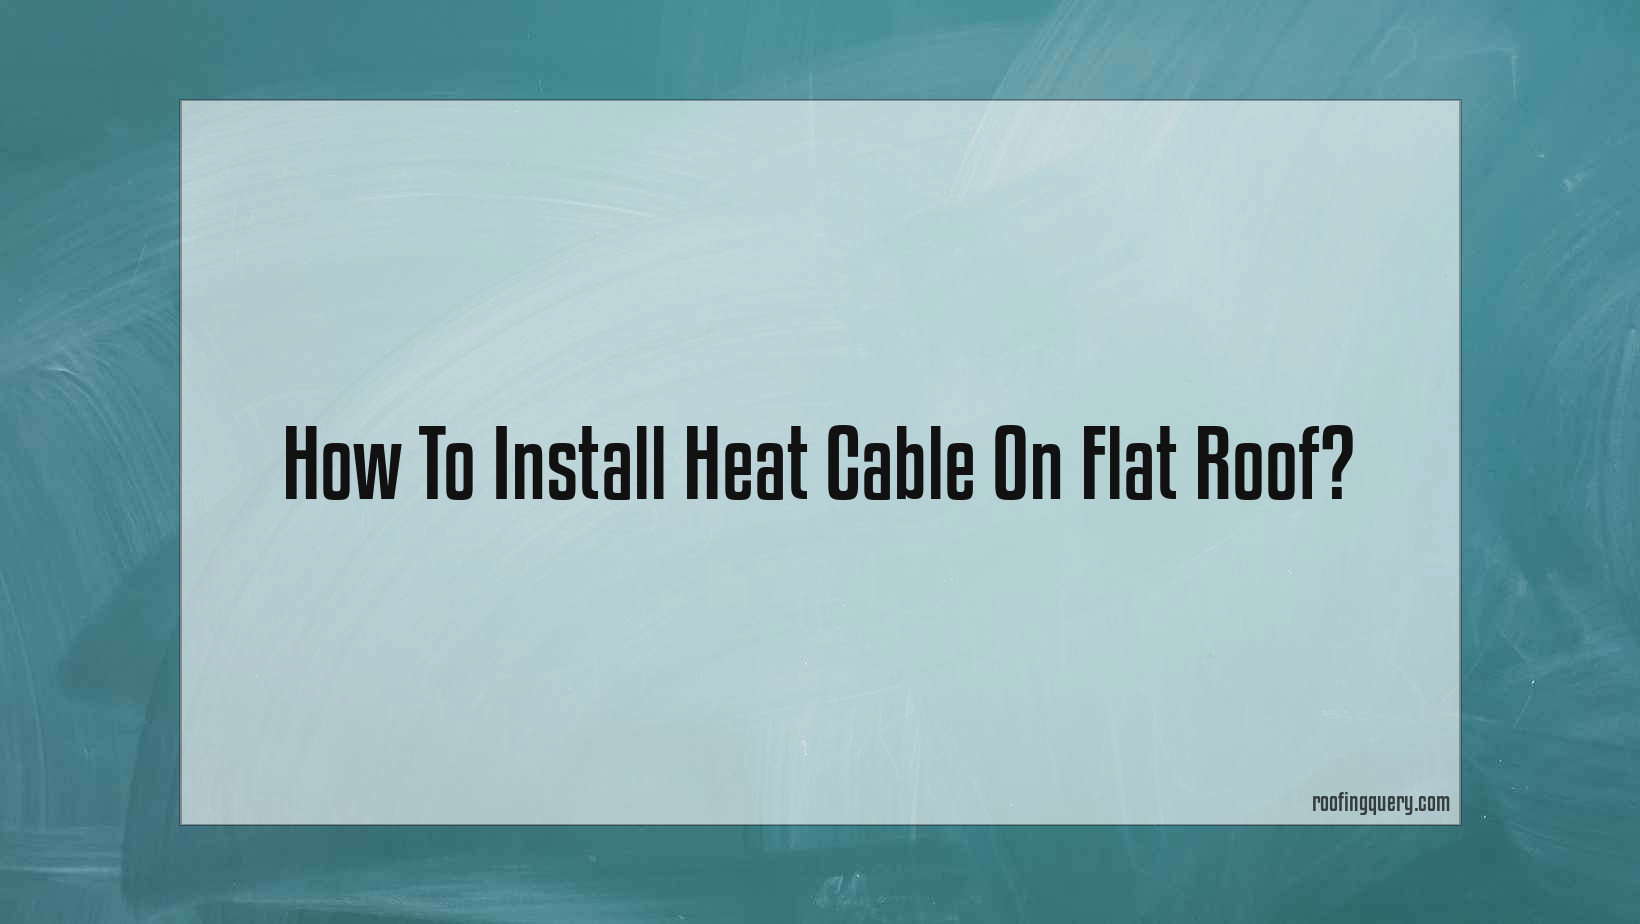 How To Install Heat Cable On Flat Roof?